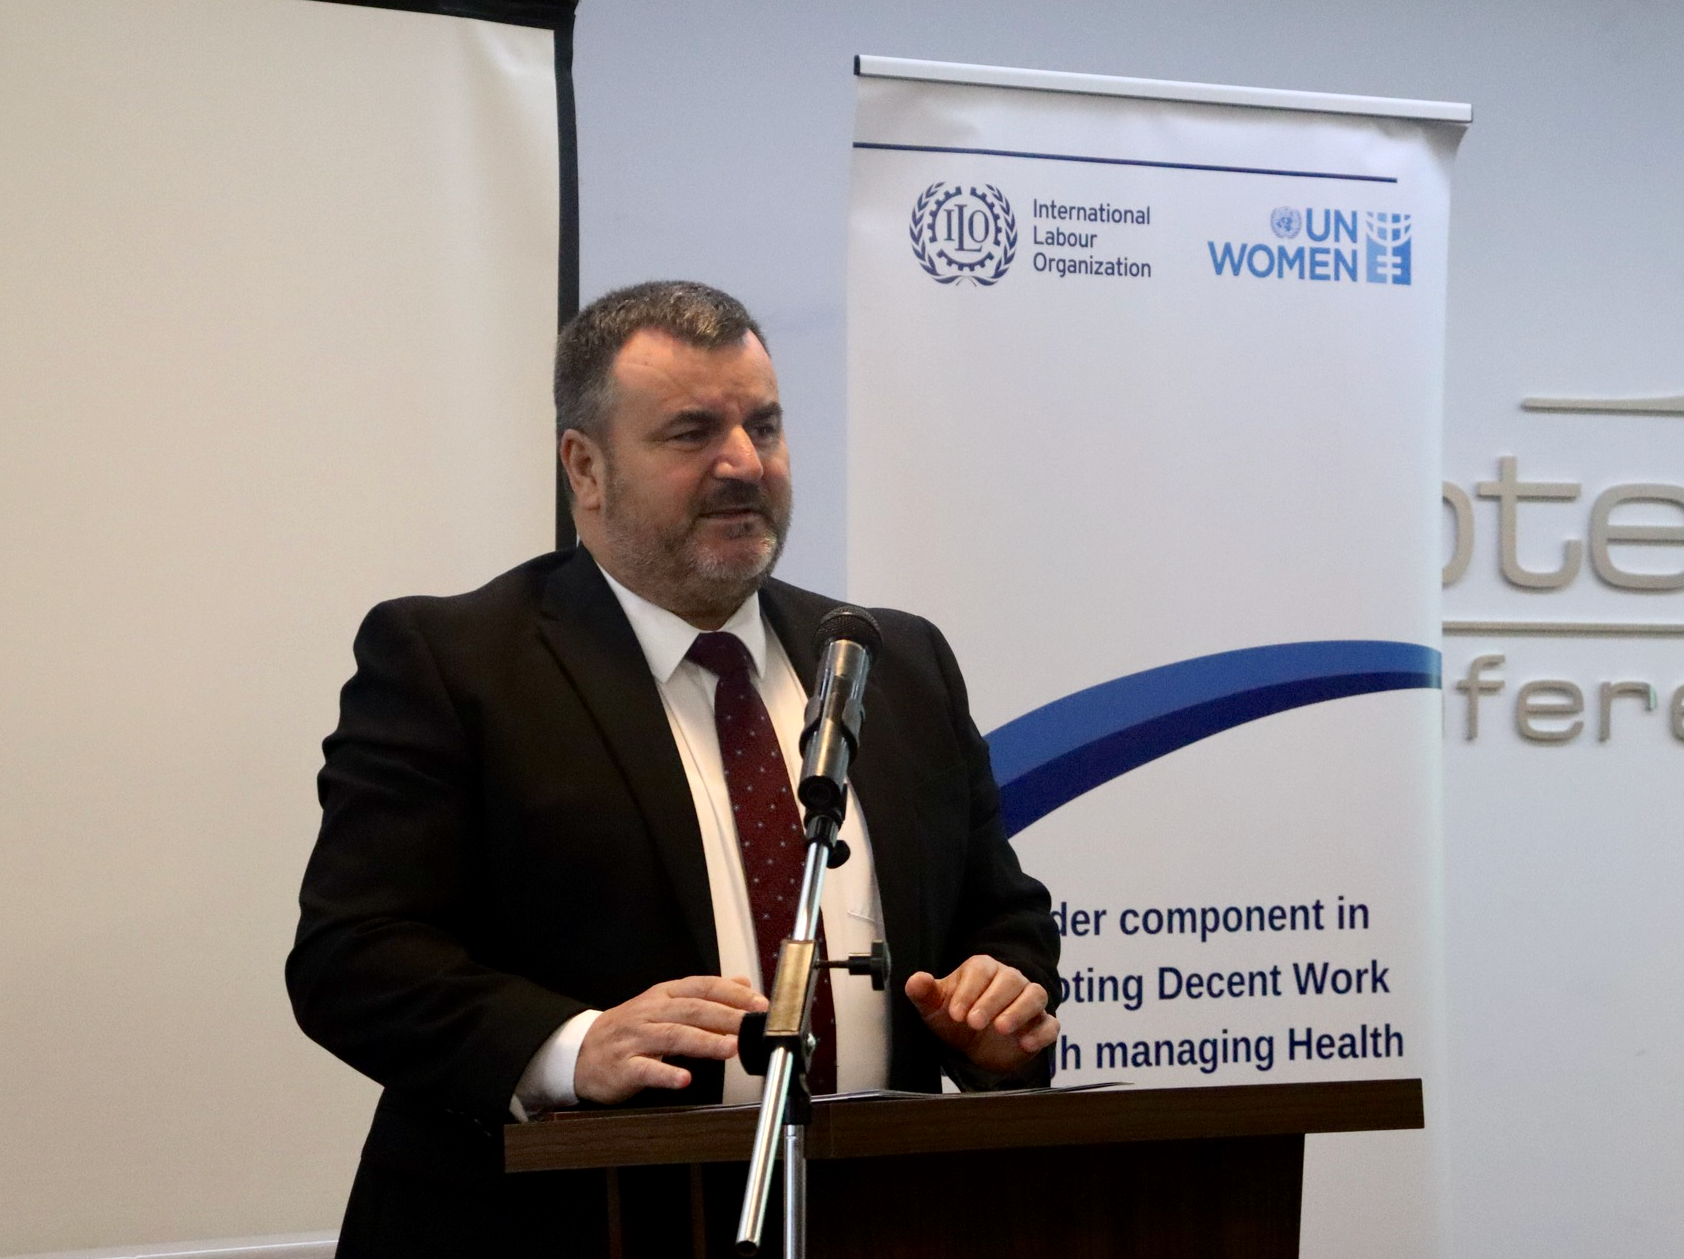 Naim Qelaj, Head of the Ombudsperson Institution of Kosovo, speaking at the launch of the study "Safety and Health at Work: A study of cases of sexual harassment at the workplace in Kosovo in the public and private sector” in Pristina. Photo: UN Women.